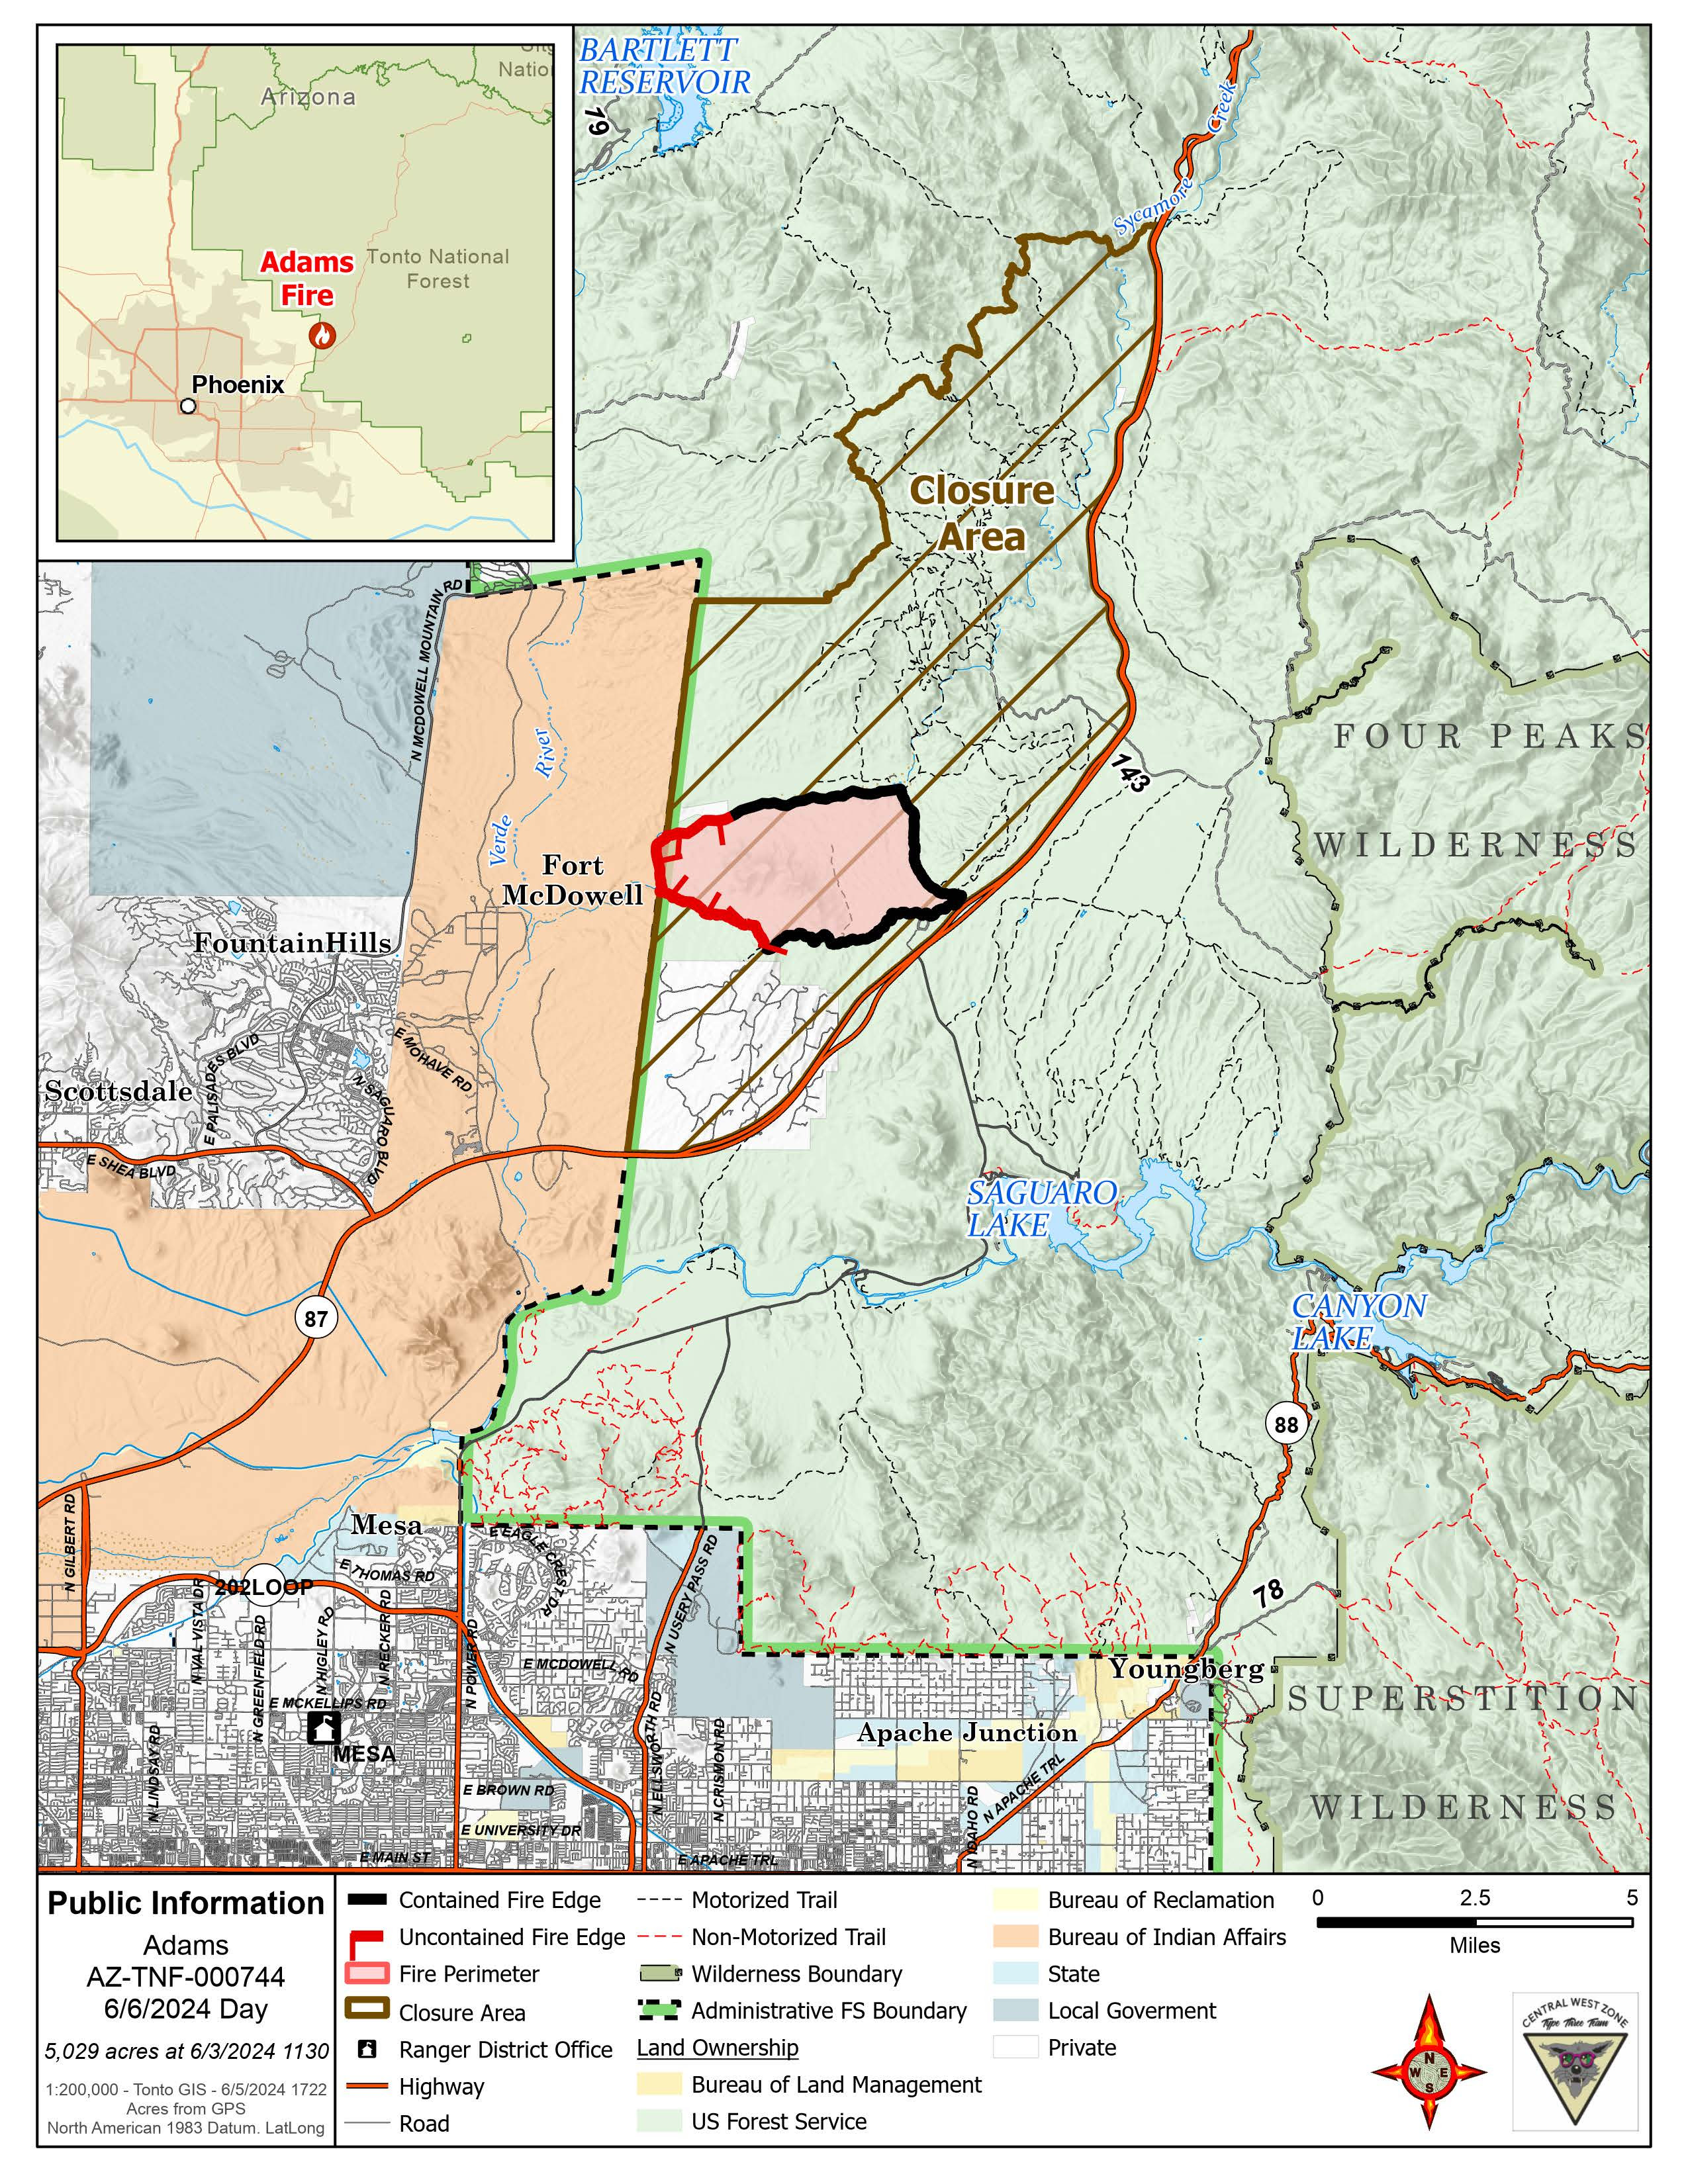 This is a map of the Adams Fire on June 6 2024